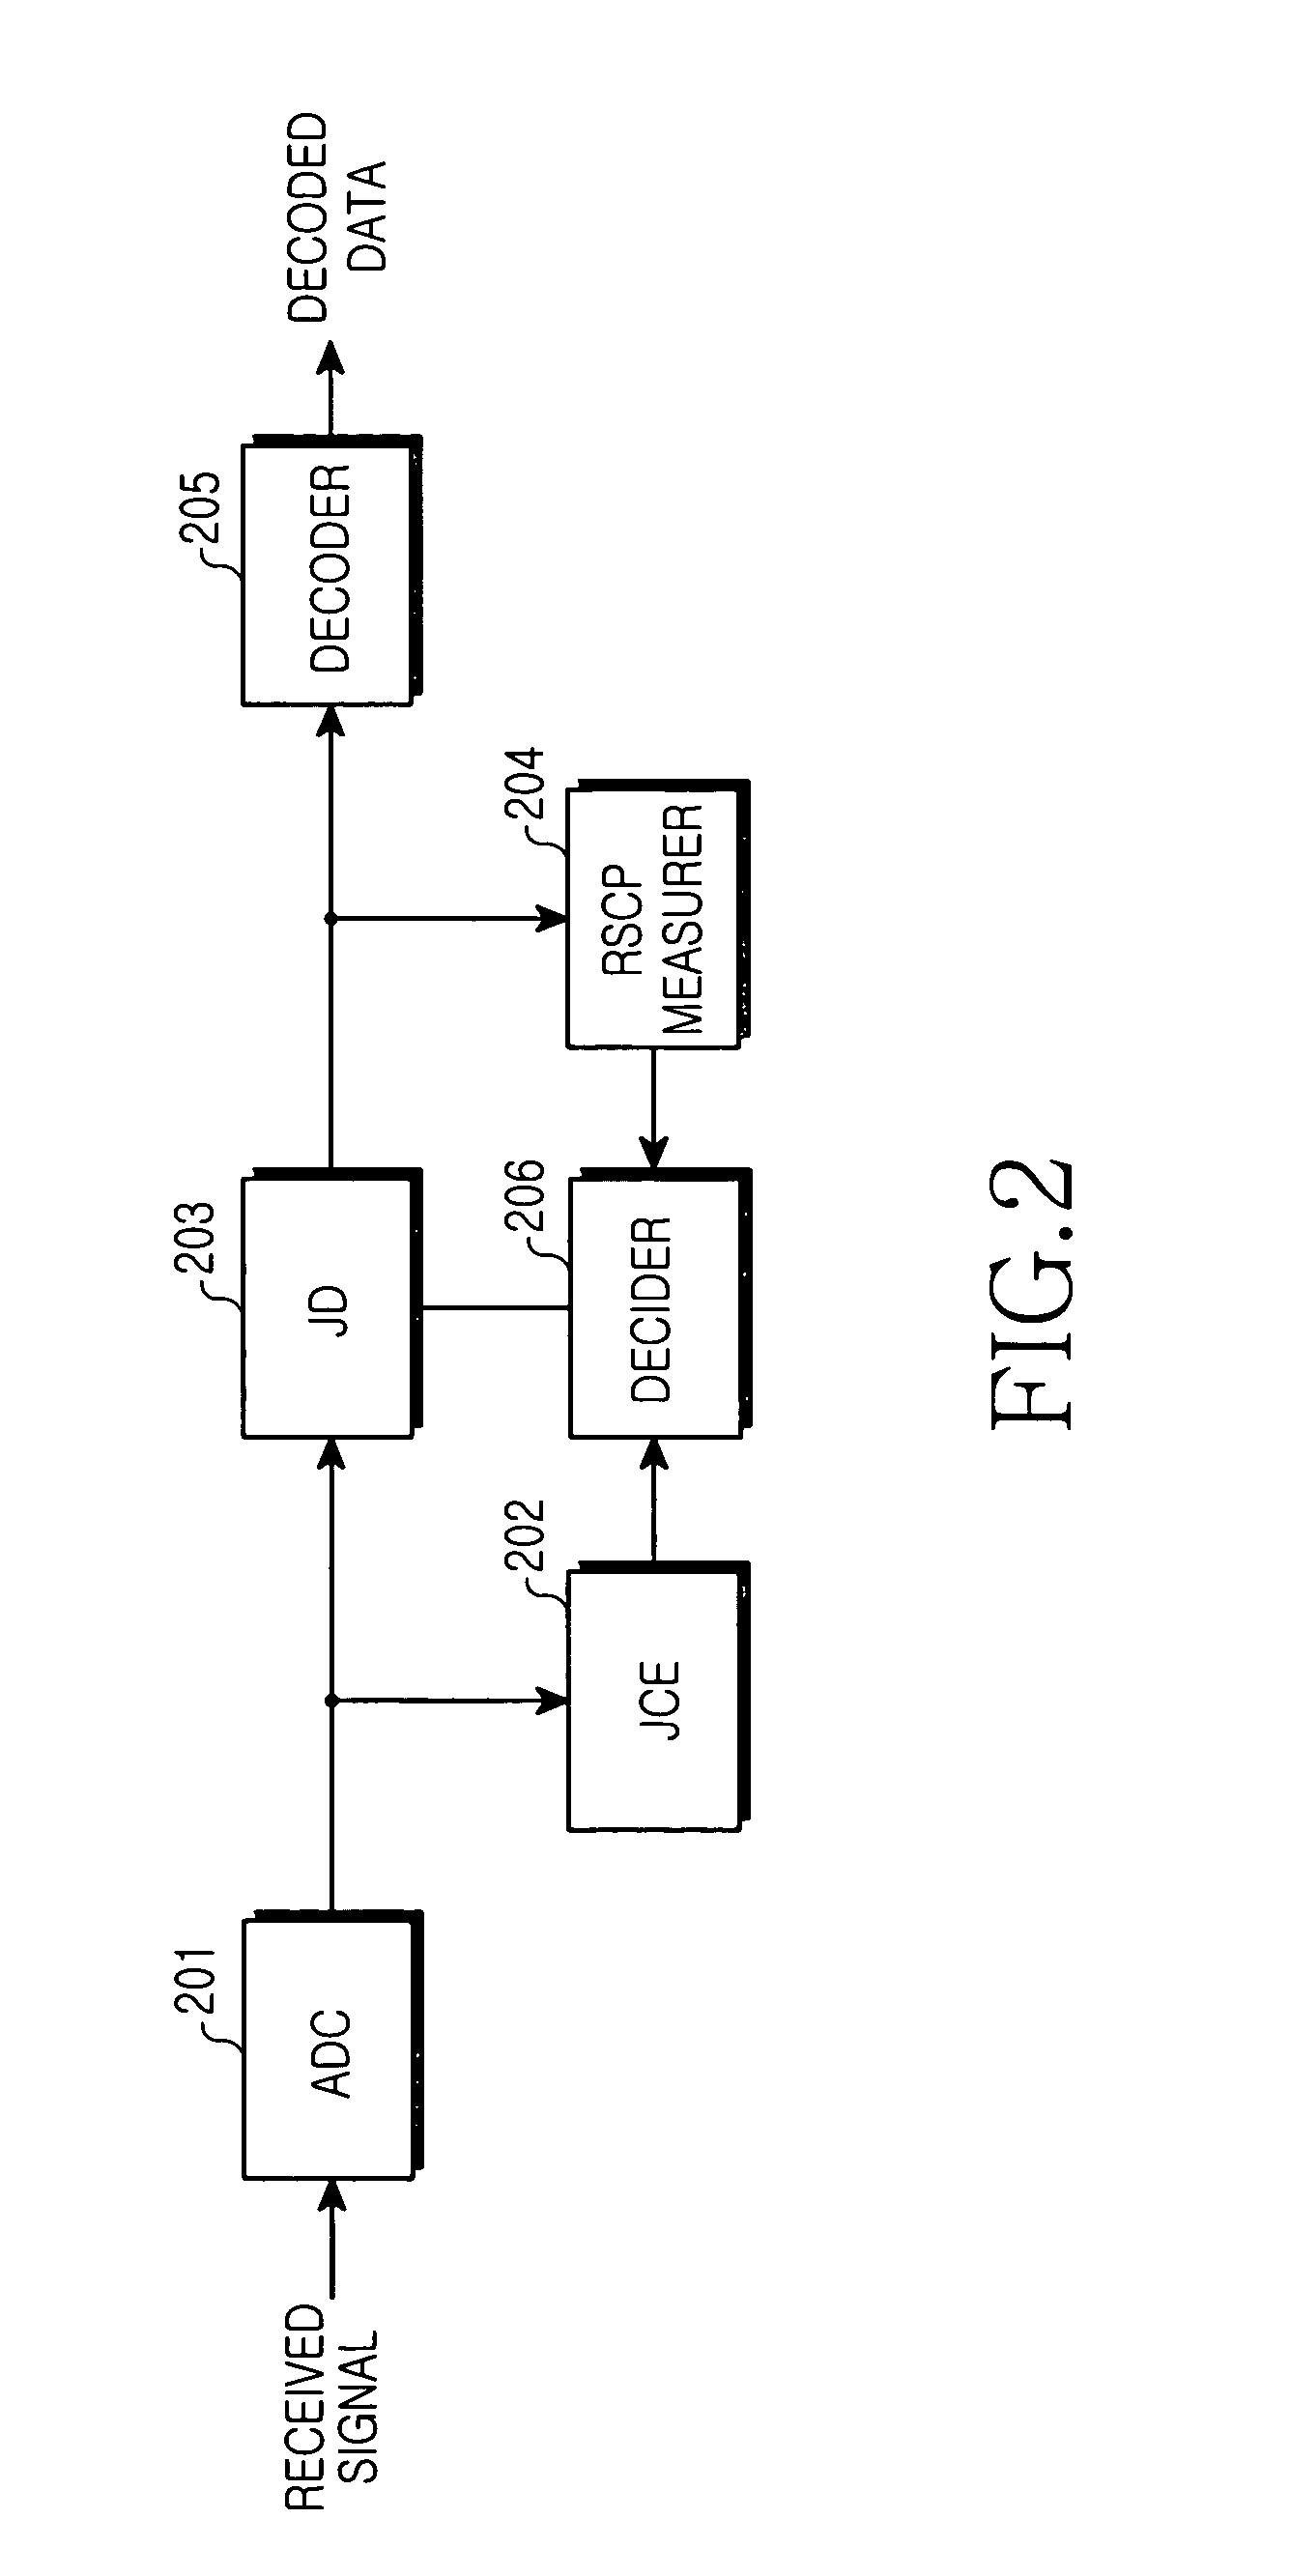 Method and apparatus for detecting active downlink channelization codes in a TD-CDMA mobile communication system